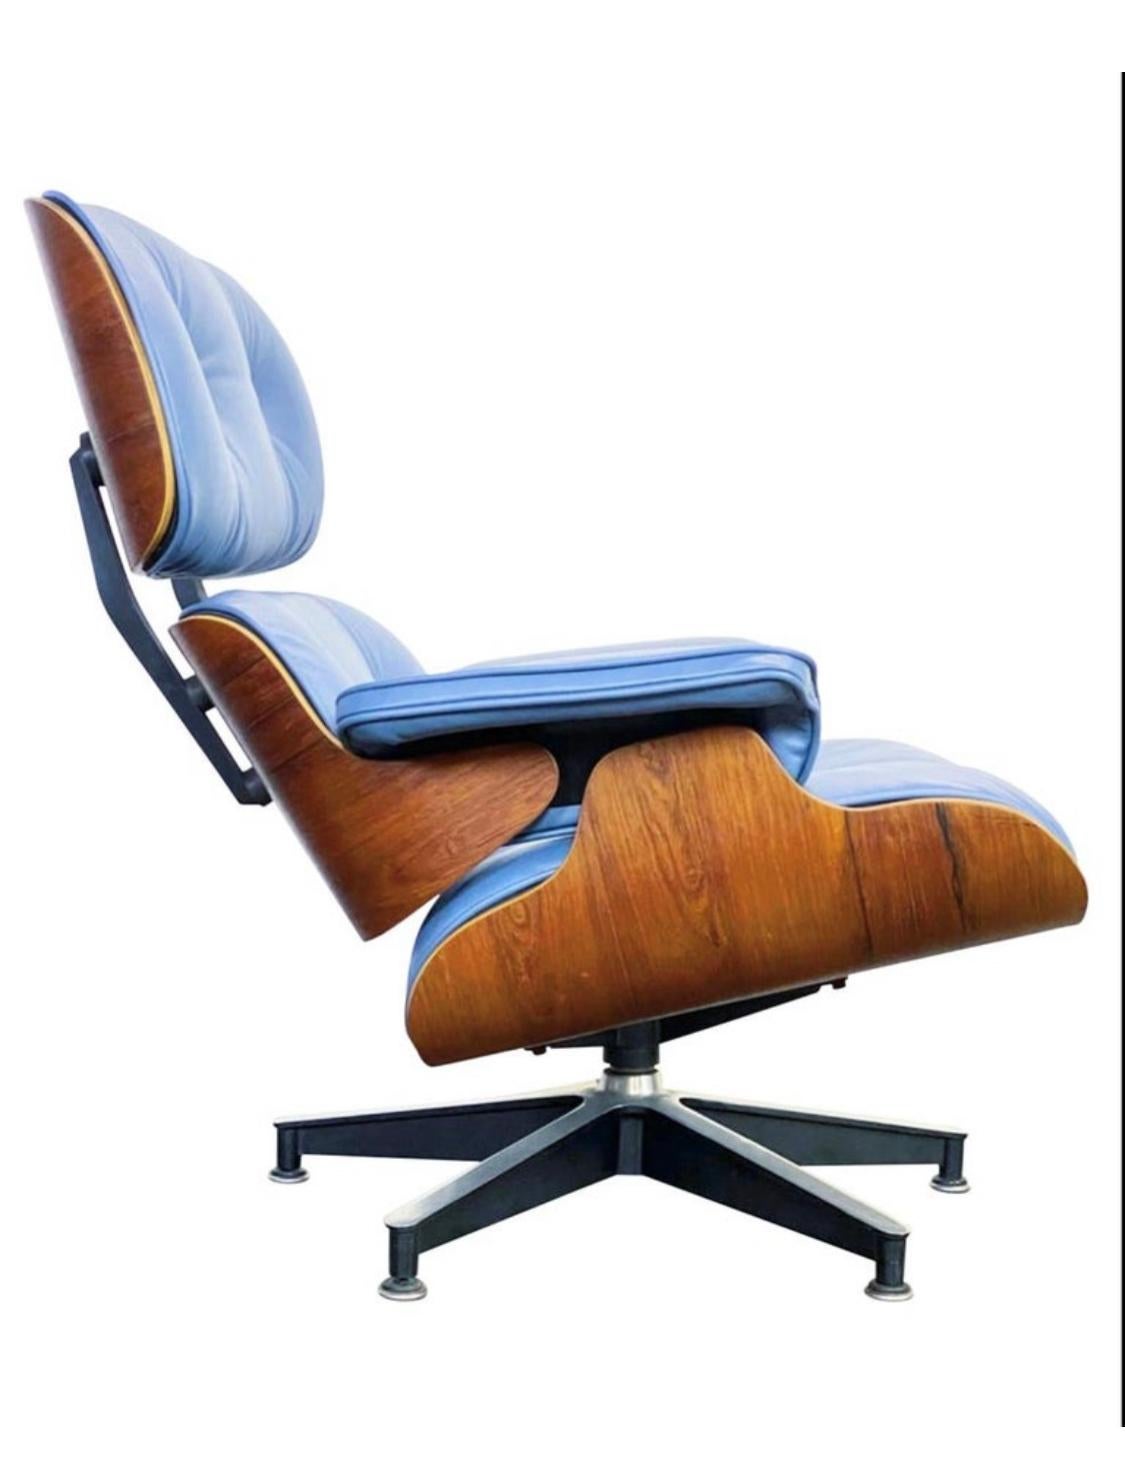 Restored Herman Miller Eames Lounge Chair with Custom Blue Leather 2